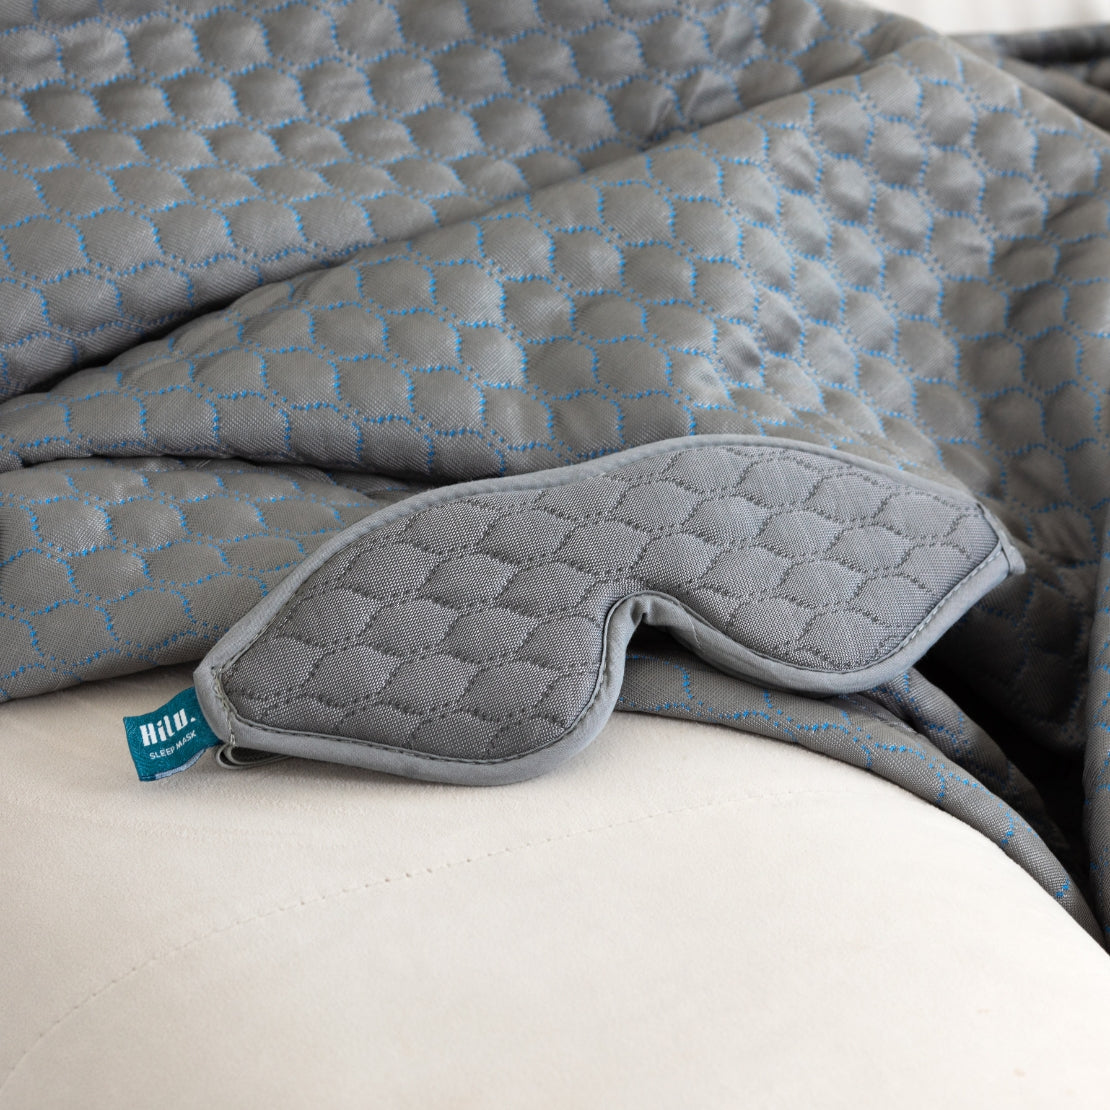 A close-up view of a gray HILU sleeping mask with a quilted pattern, placed atop a matching quilted blanket. The mask features the 'Hilu' brand label in blue.